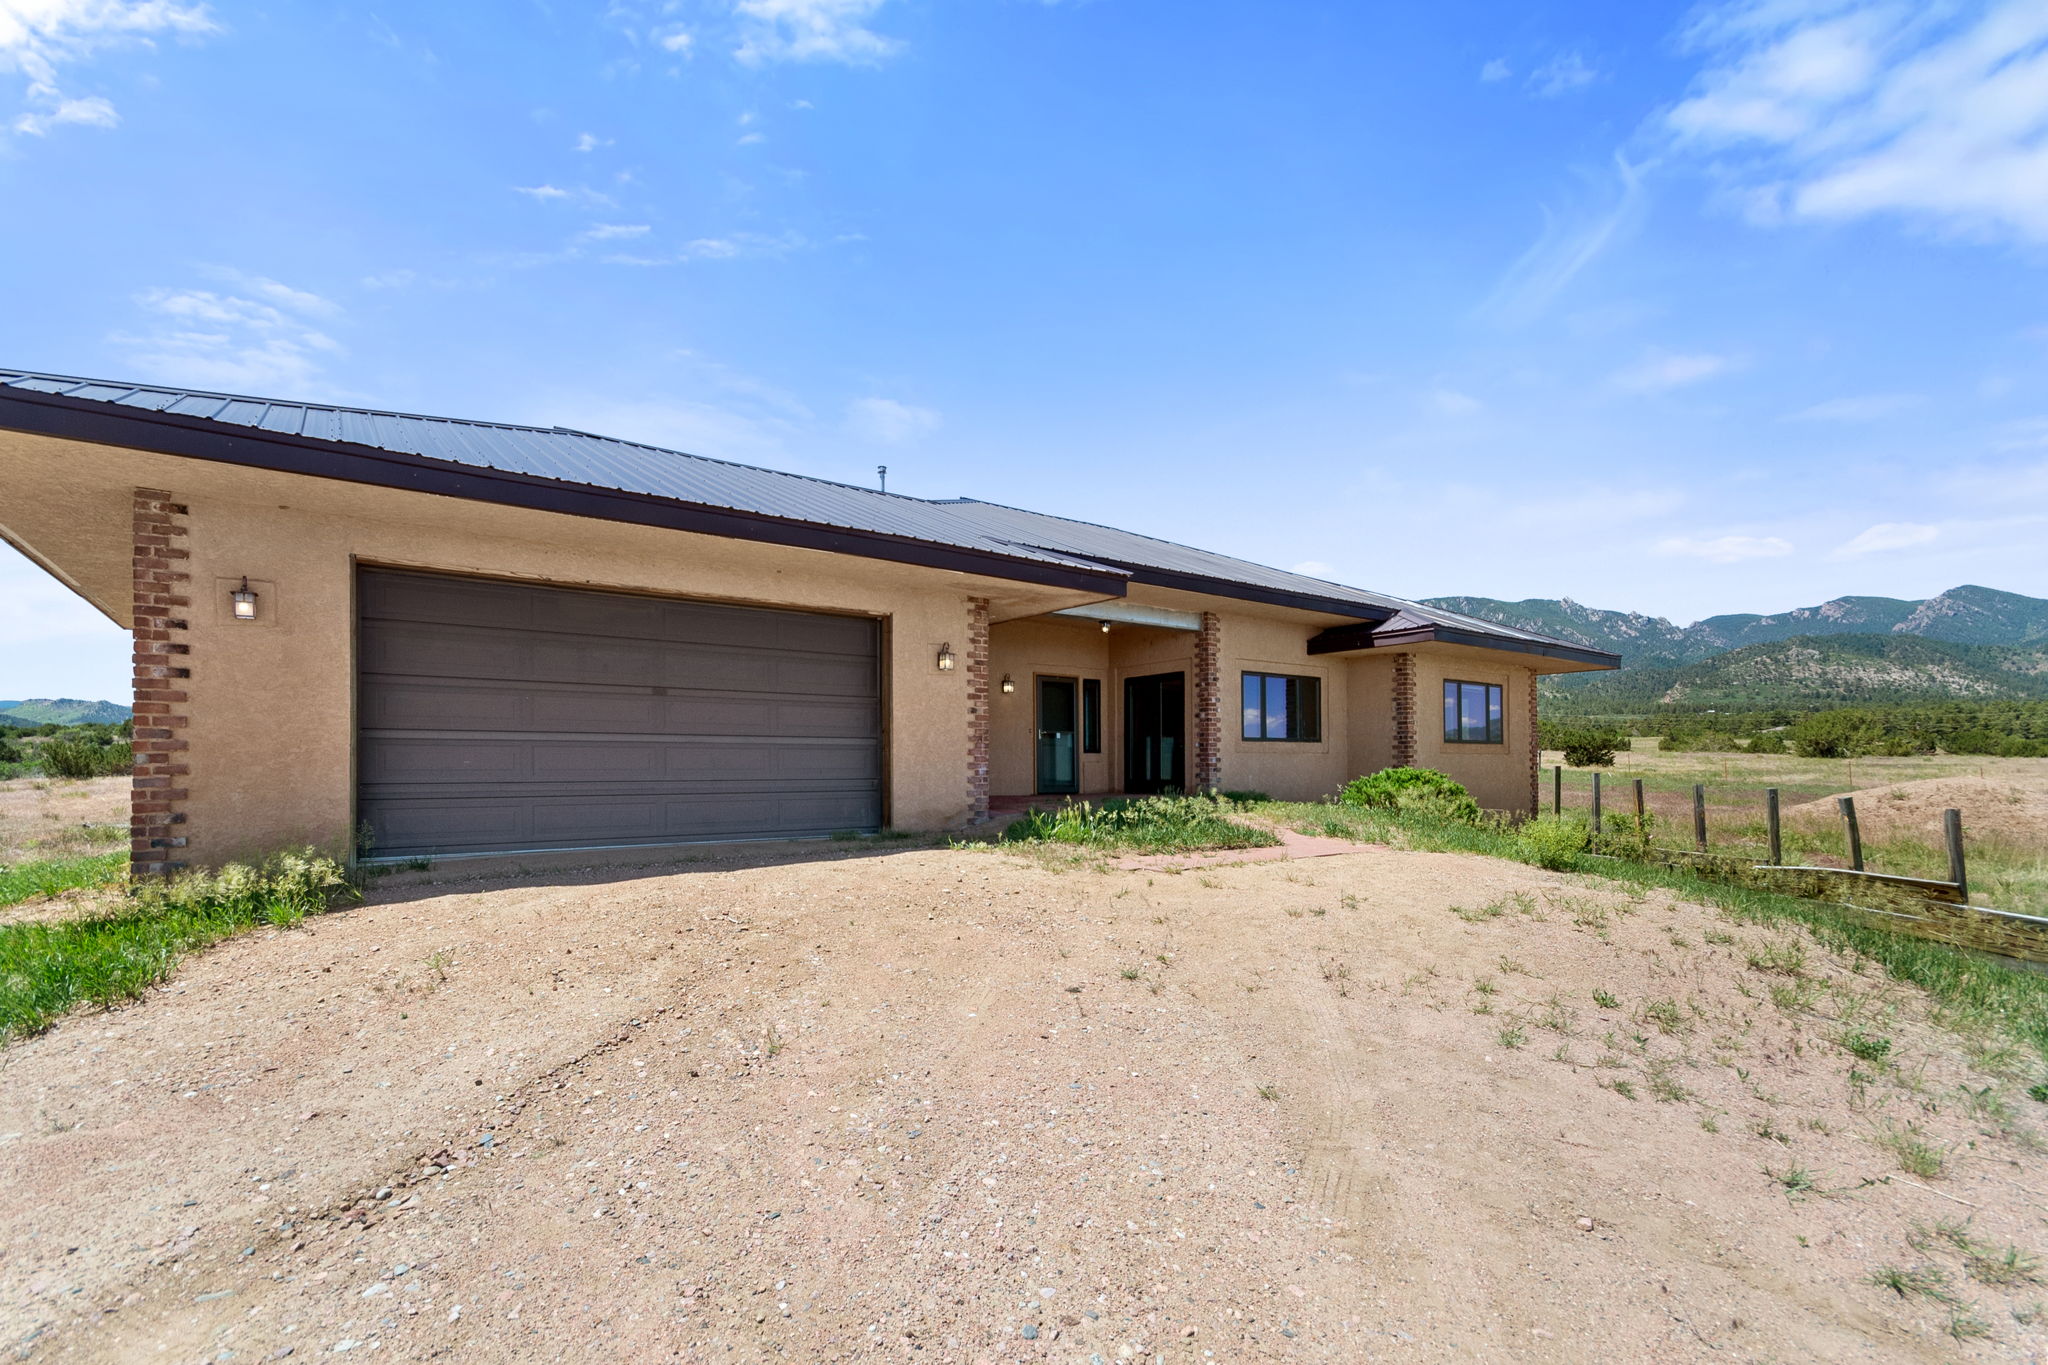  460 Co Rd 290, Florence, CO 81226, US Photo 4